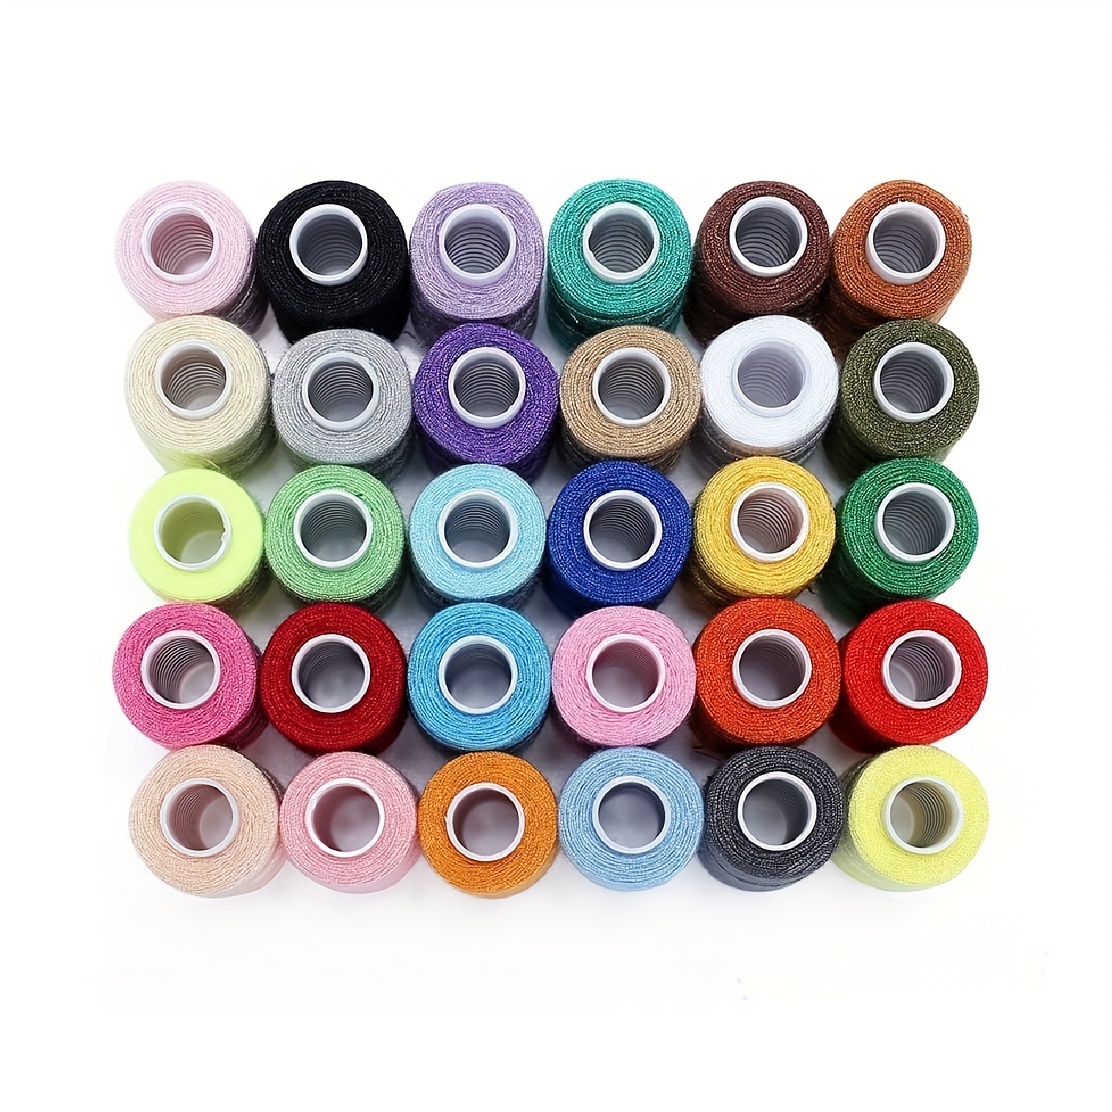 36 Colors Sewing Threads Reels 400 Yards Per Spool Colorful